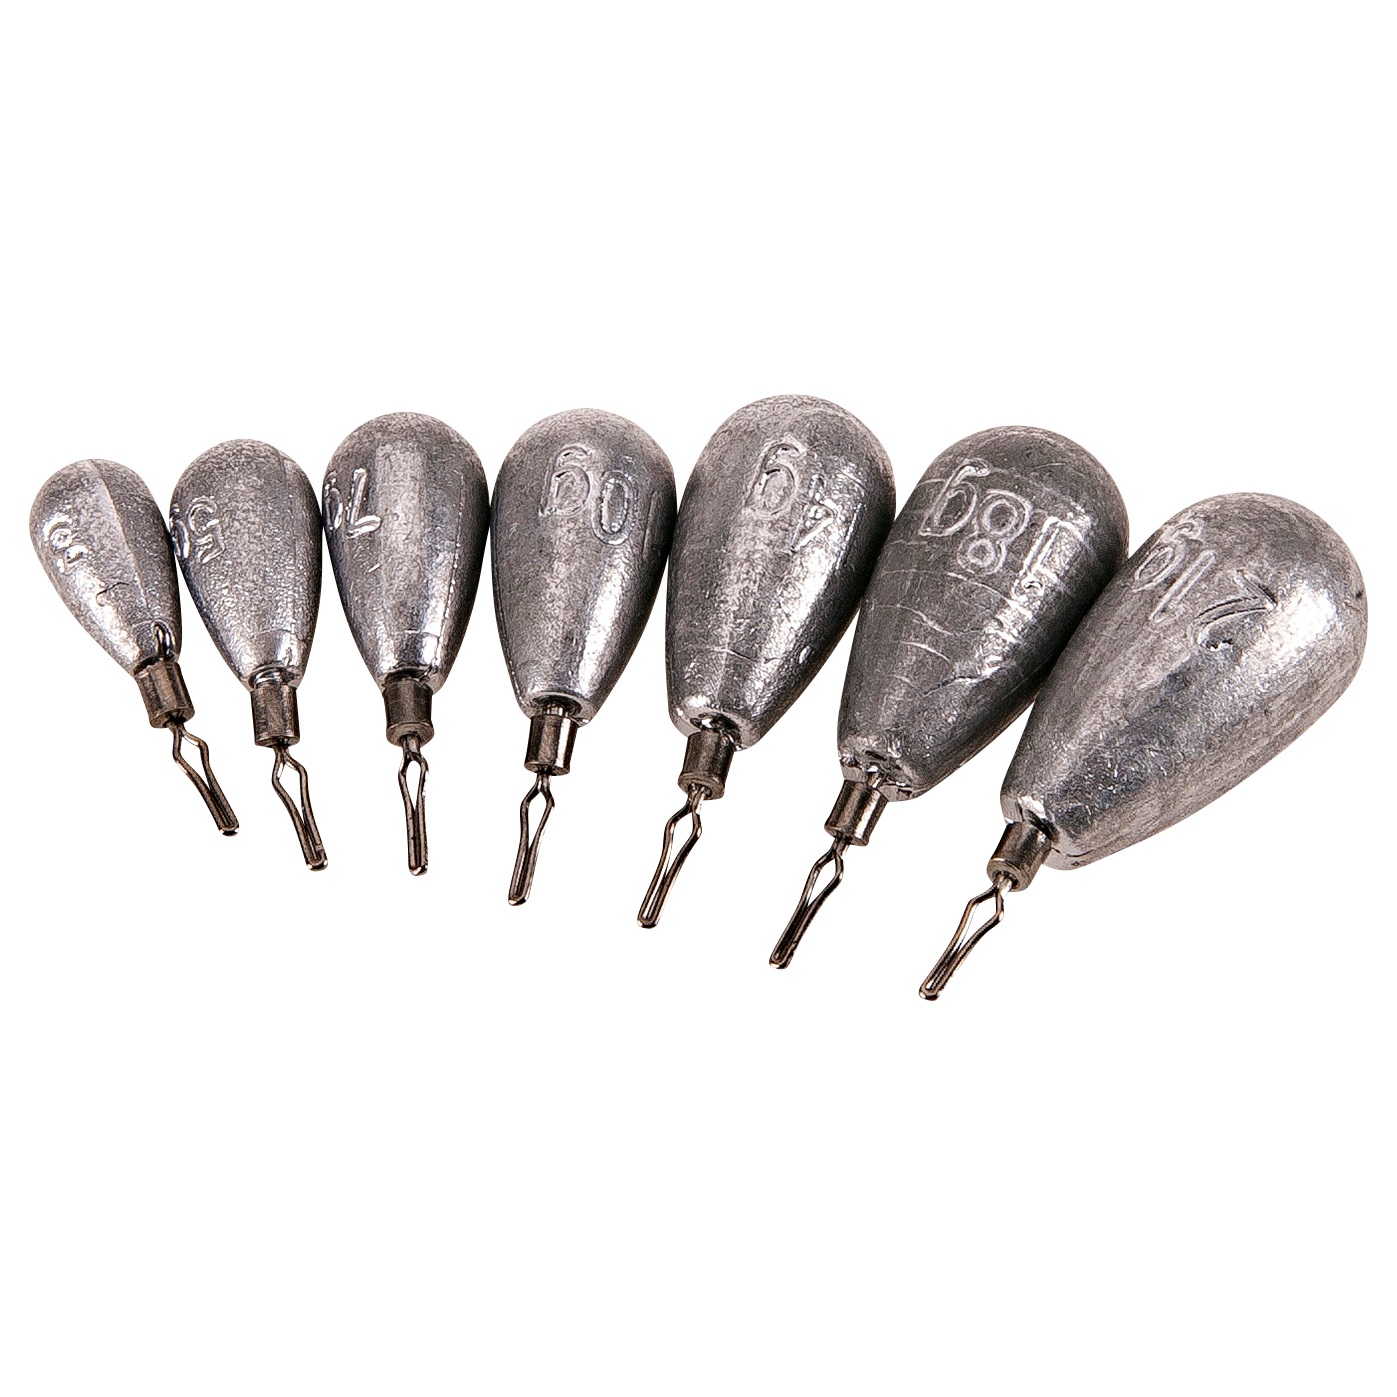 Iron Claw Sänger Iron Claw Tear Drop Sinkers - Blei 